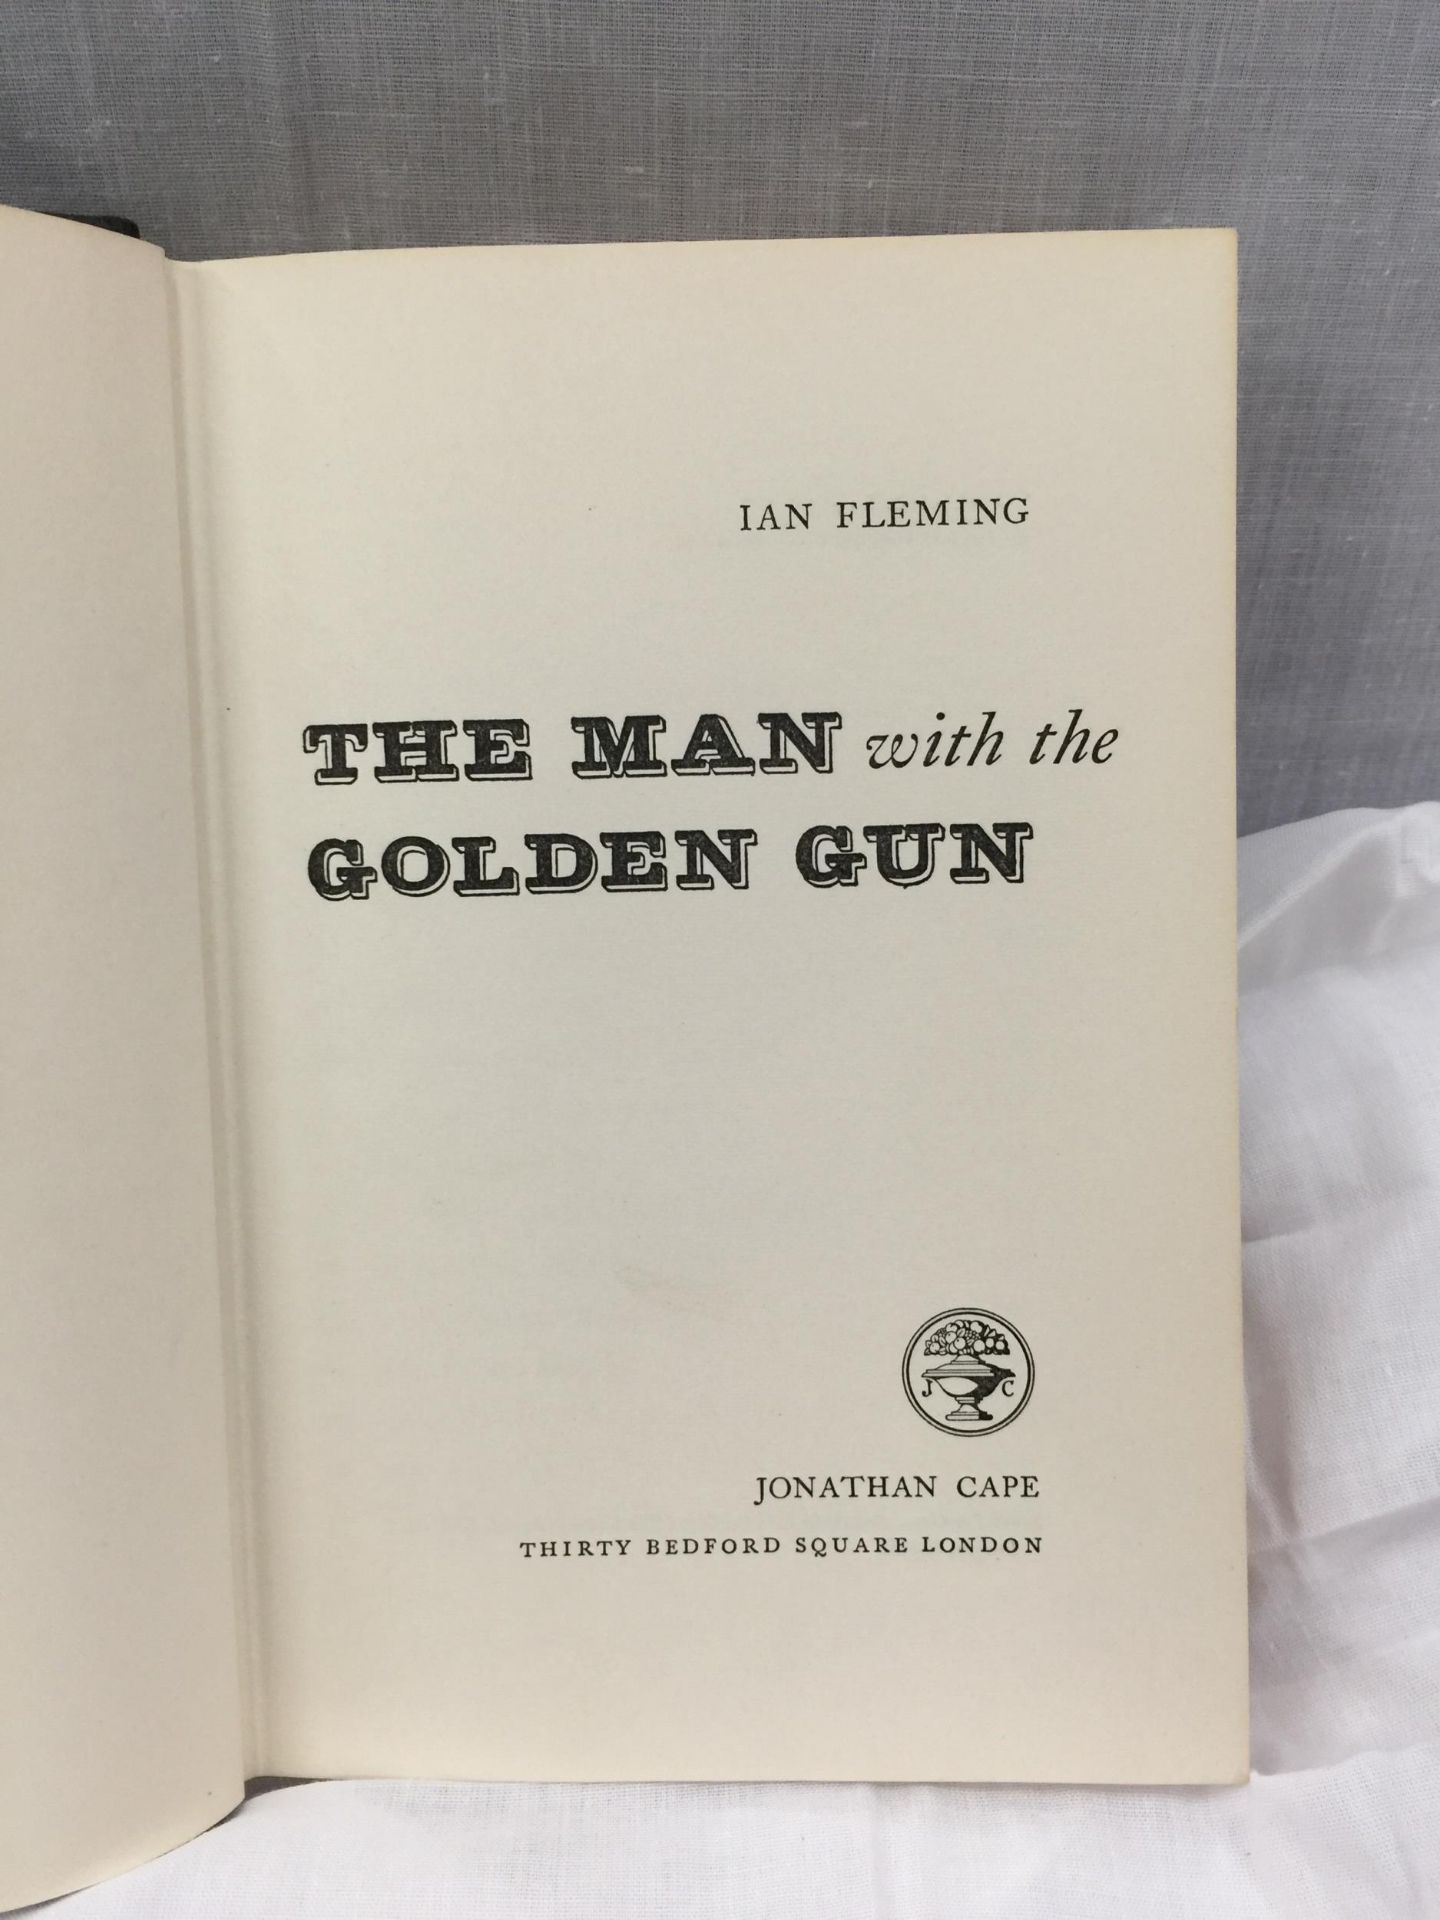 A FIRST EDITION JAMES BOND NOVEL - THE MAN WITH THE GOLDEN GUN BY IAN FLEMING, HARDBACK WITH DUST - Image 7 of 11